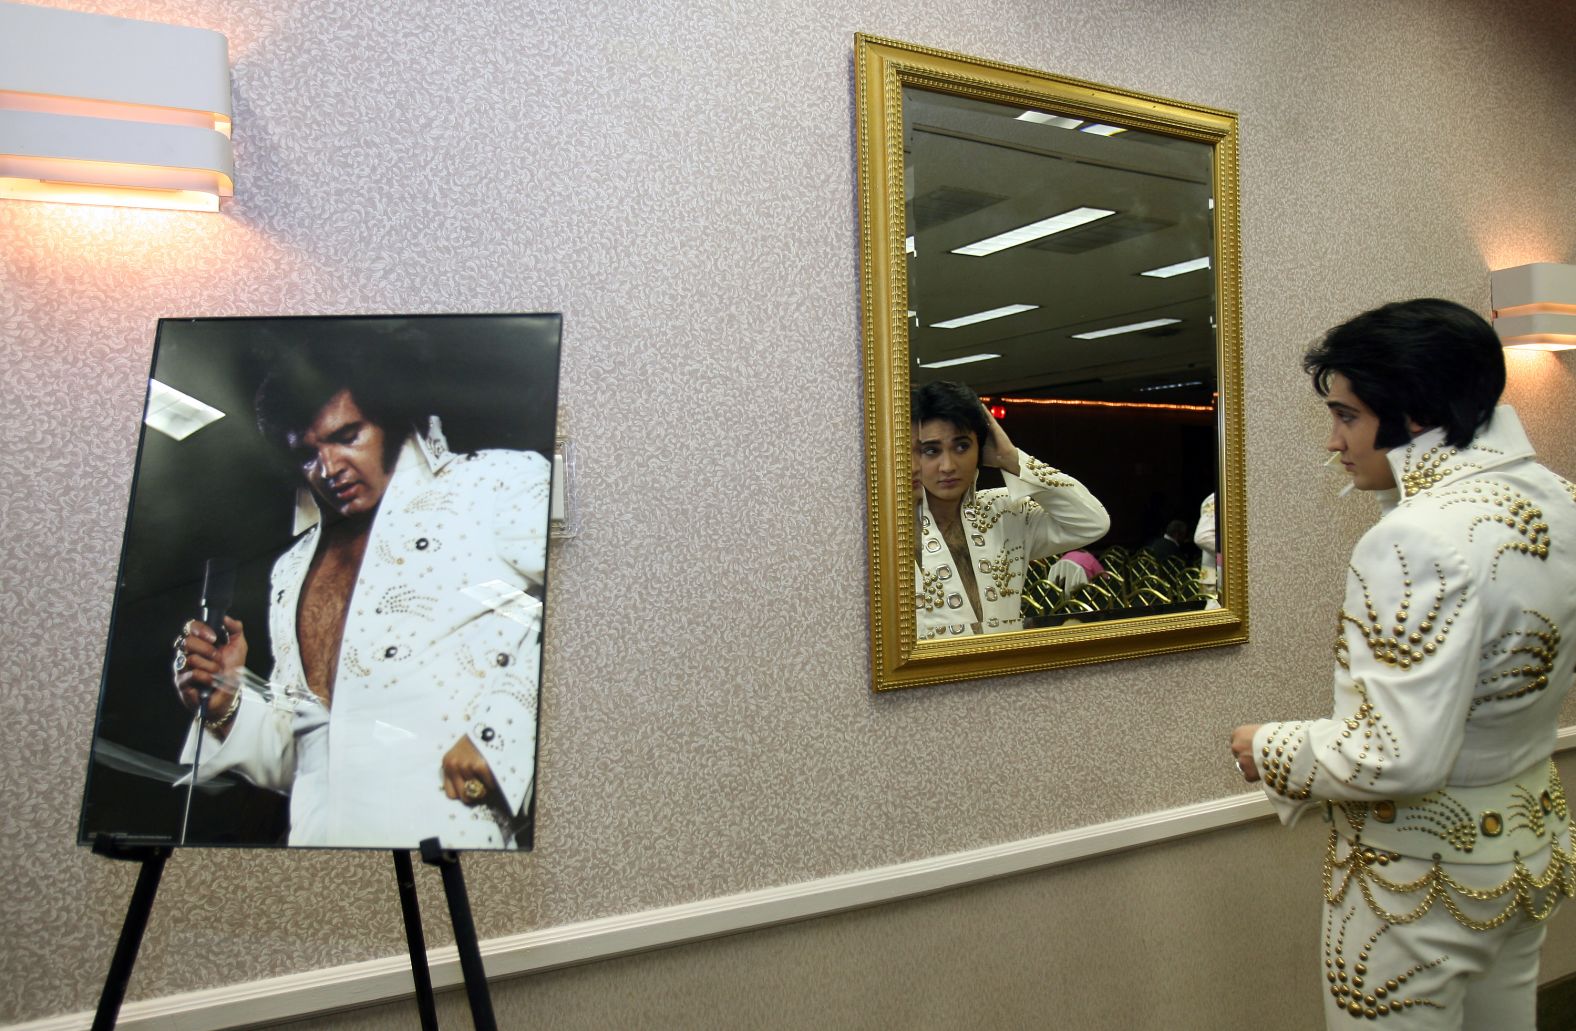 Justin Shandor checks his wig before participating in an Elvis lookalike contest in 2006.